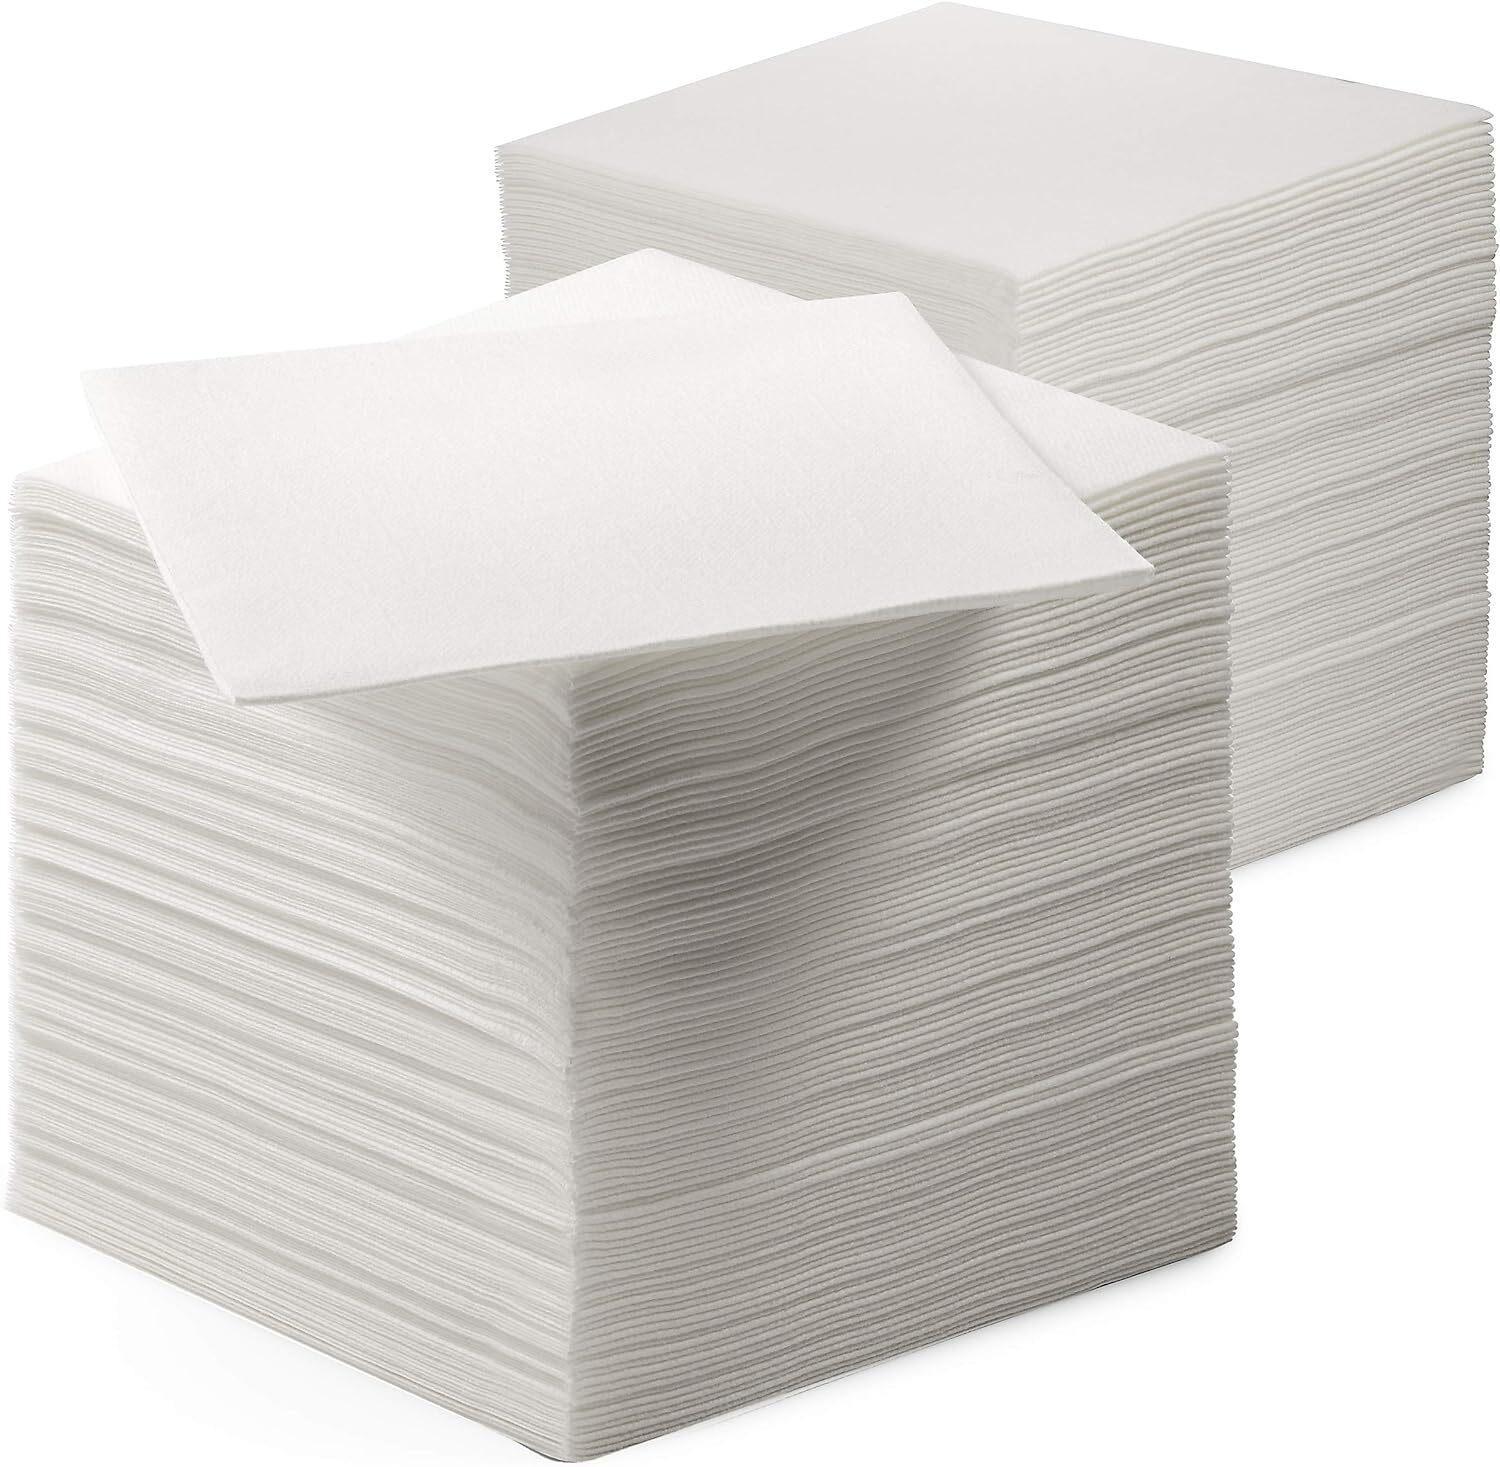 2400 x PLAIN WHITE PAPER LUNCH NAPKINS 30 x 30cm | Catering Parties Food Serving Made from Eco Friendly & Sustainable Materials